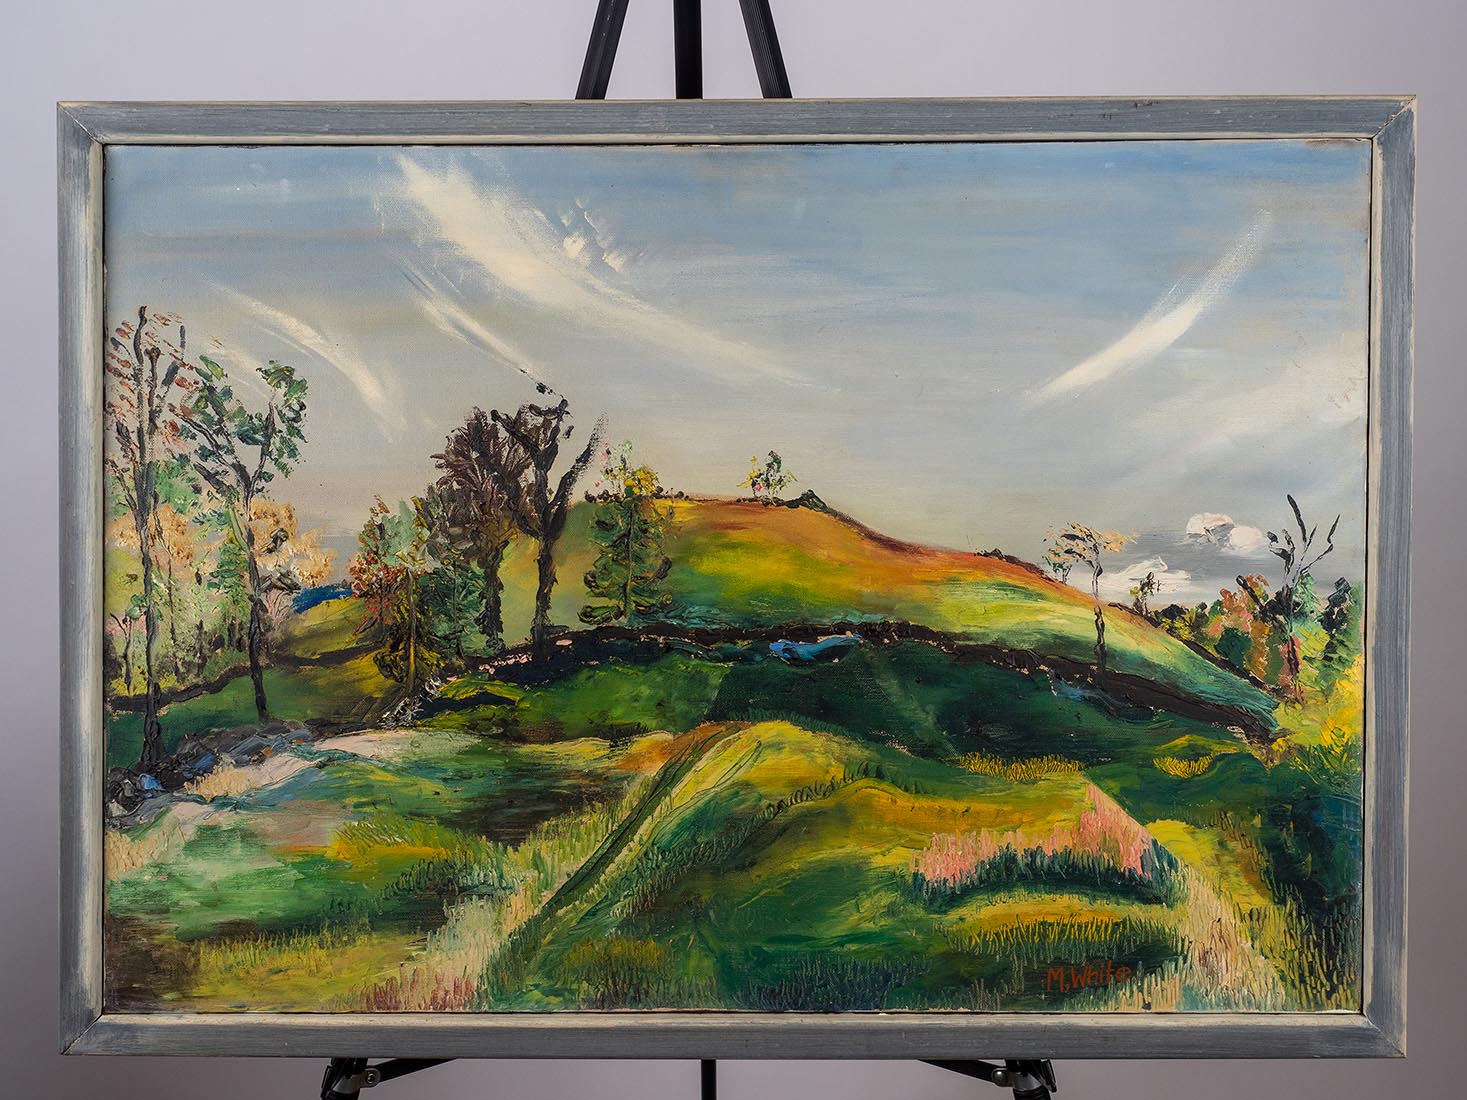 Landscape oil painting by Marjorie White Williams